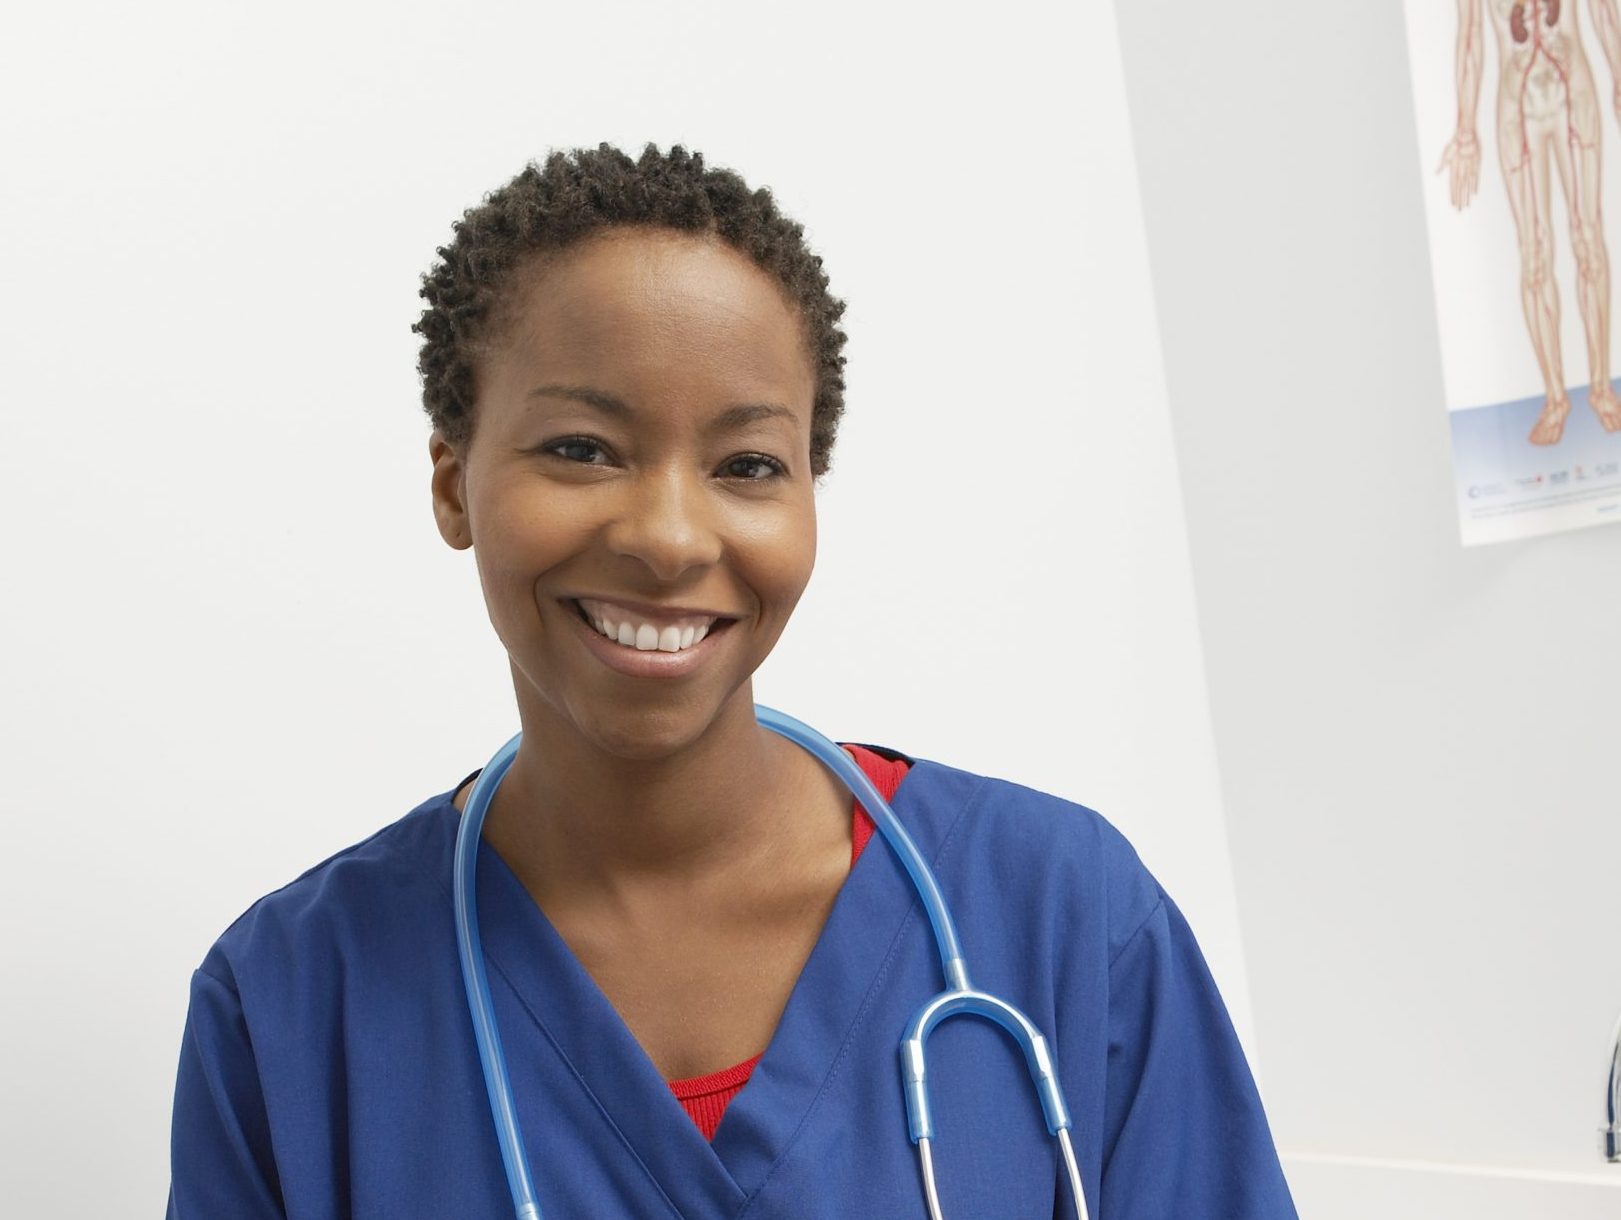 50 Best Nursing Careers Based On Salary And Demand Top Rn To Bsn 